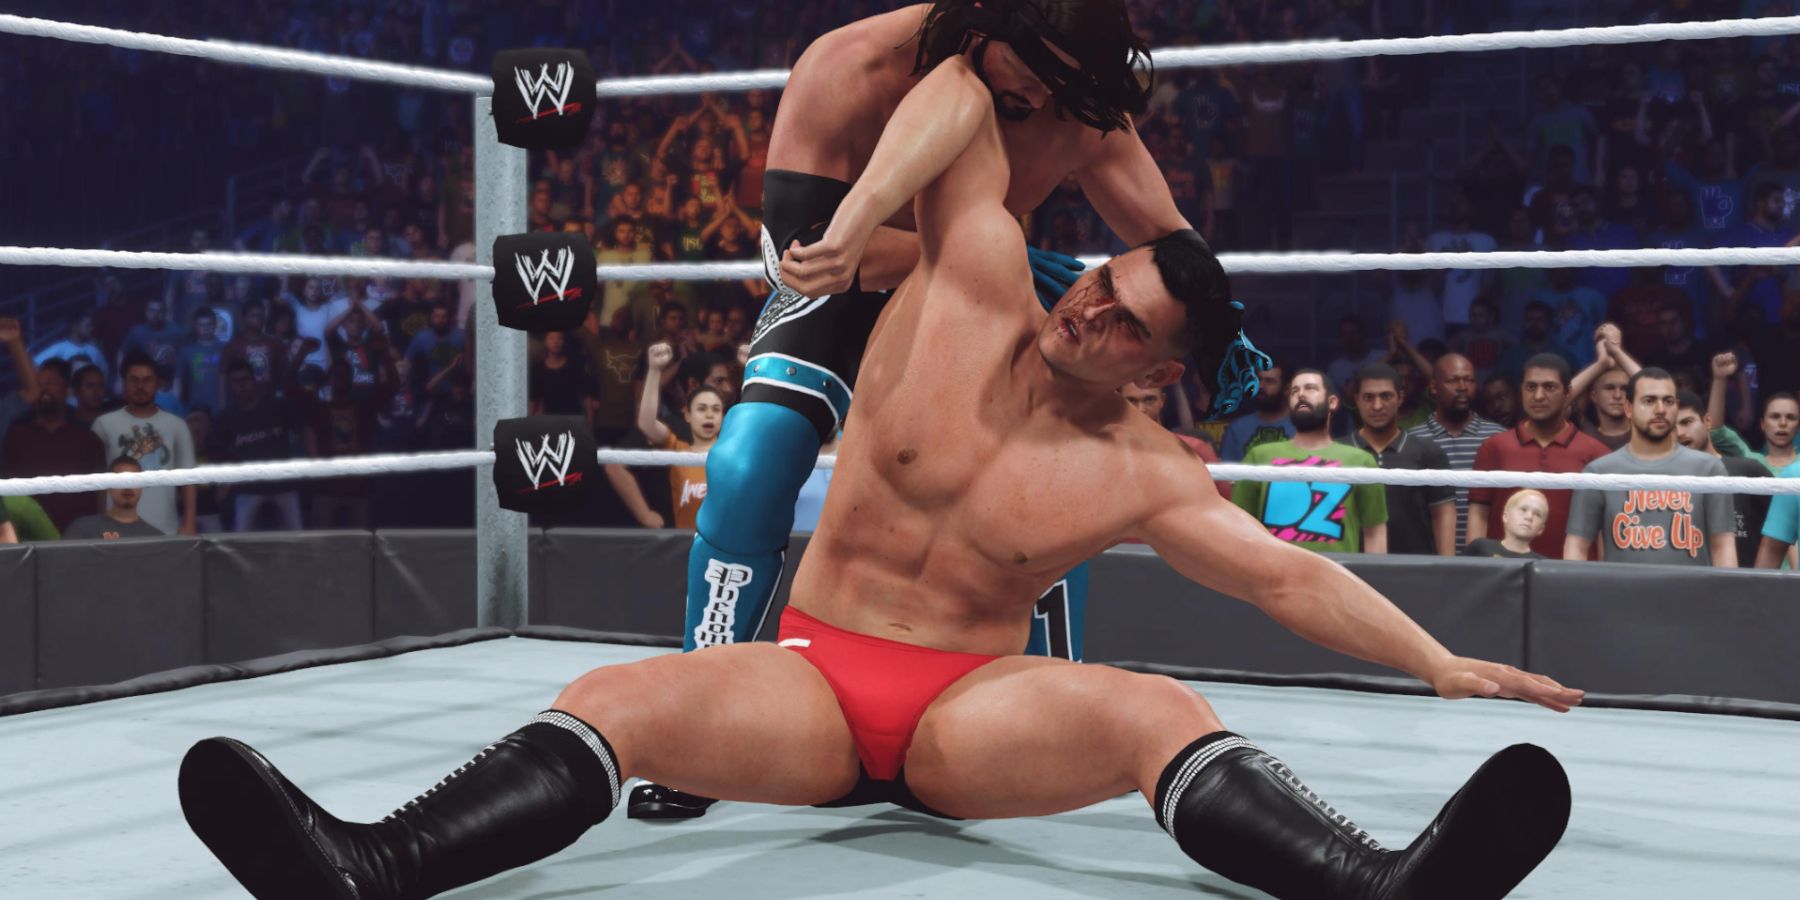 WWE 2K22 Controls (PS5, PS4 & Xbox), How To Reverse & Perform All Moves